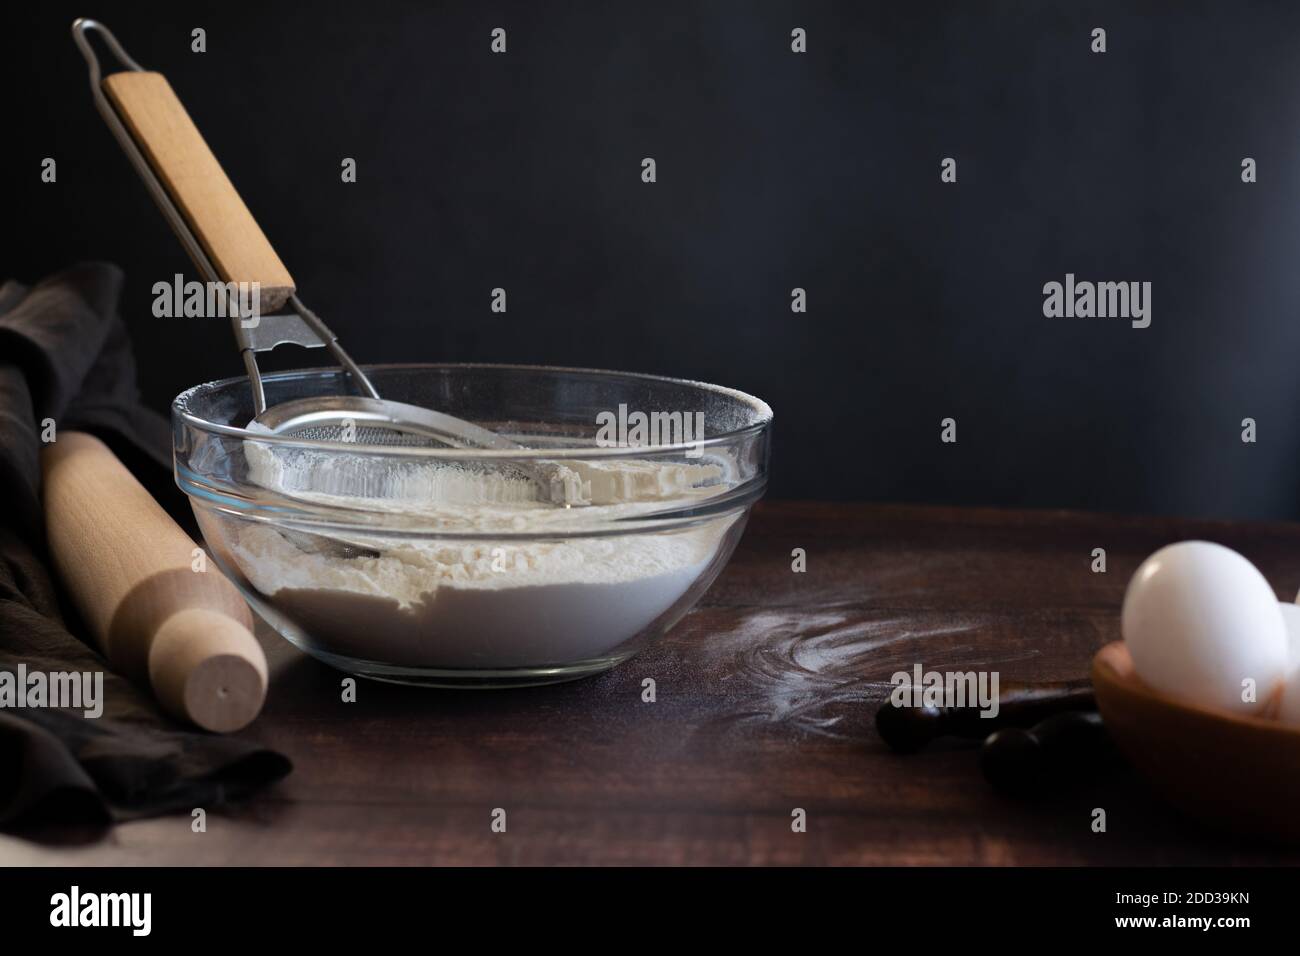 Bakery items - flour and eggs on dark background, healthy basic baking ingredients. Space for text Stock Photo